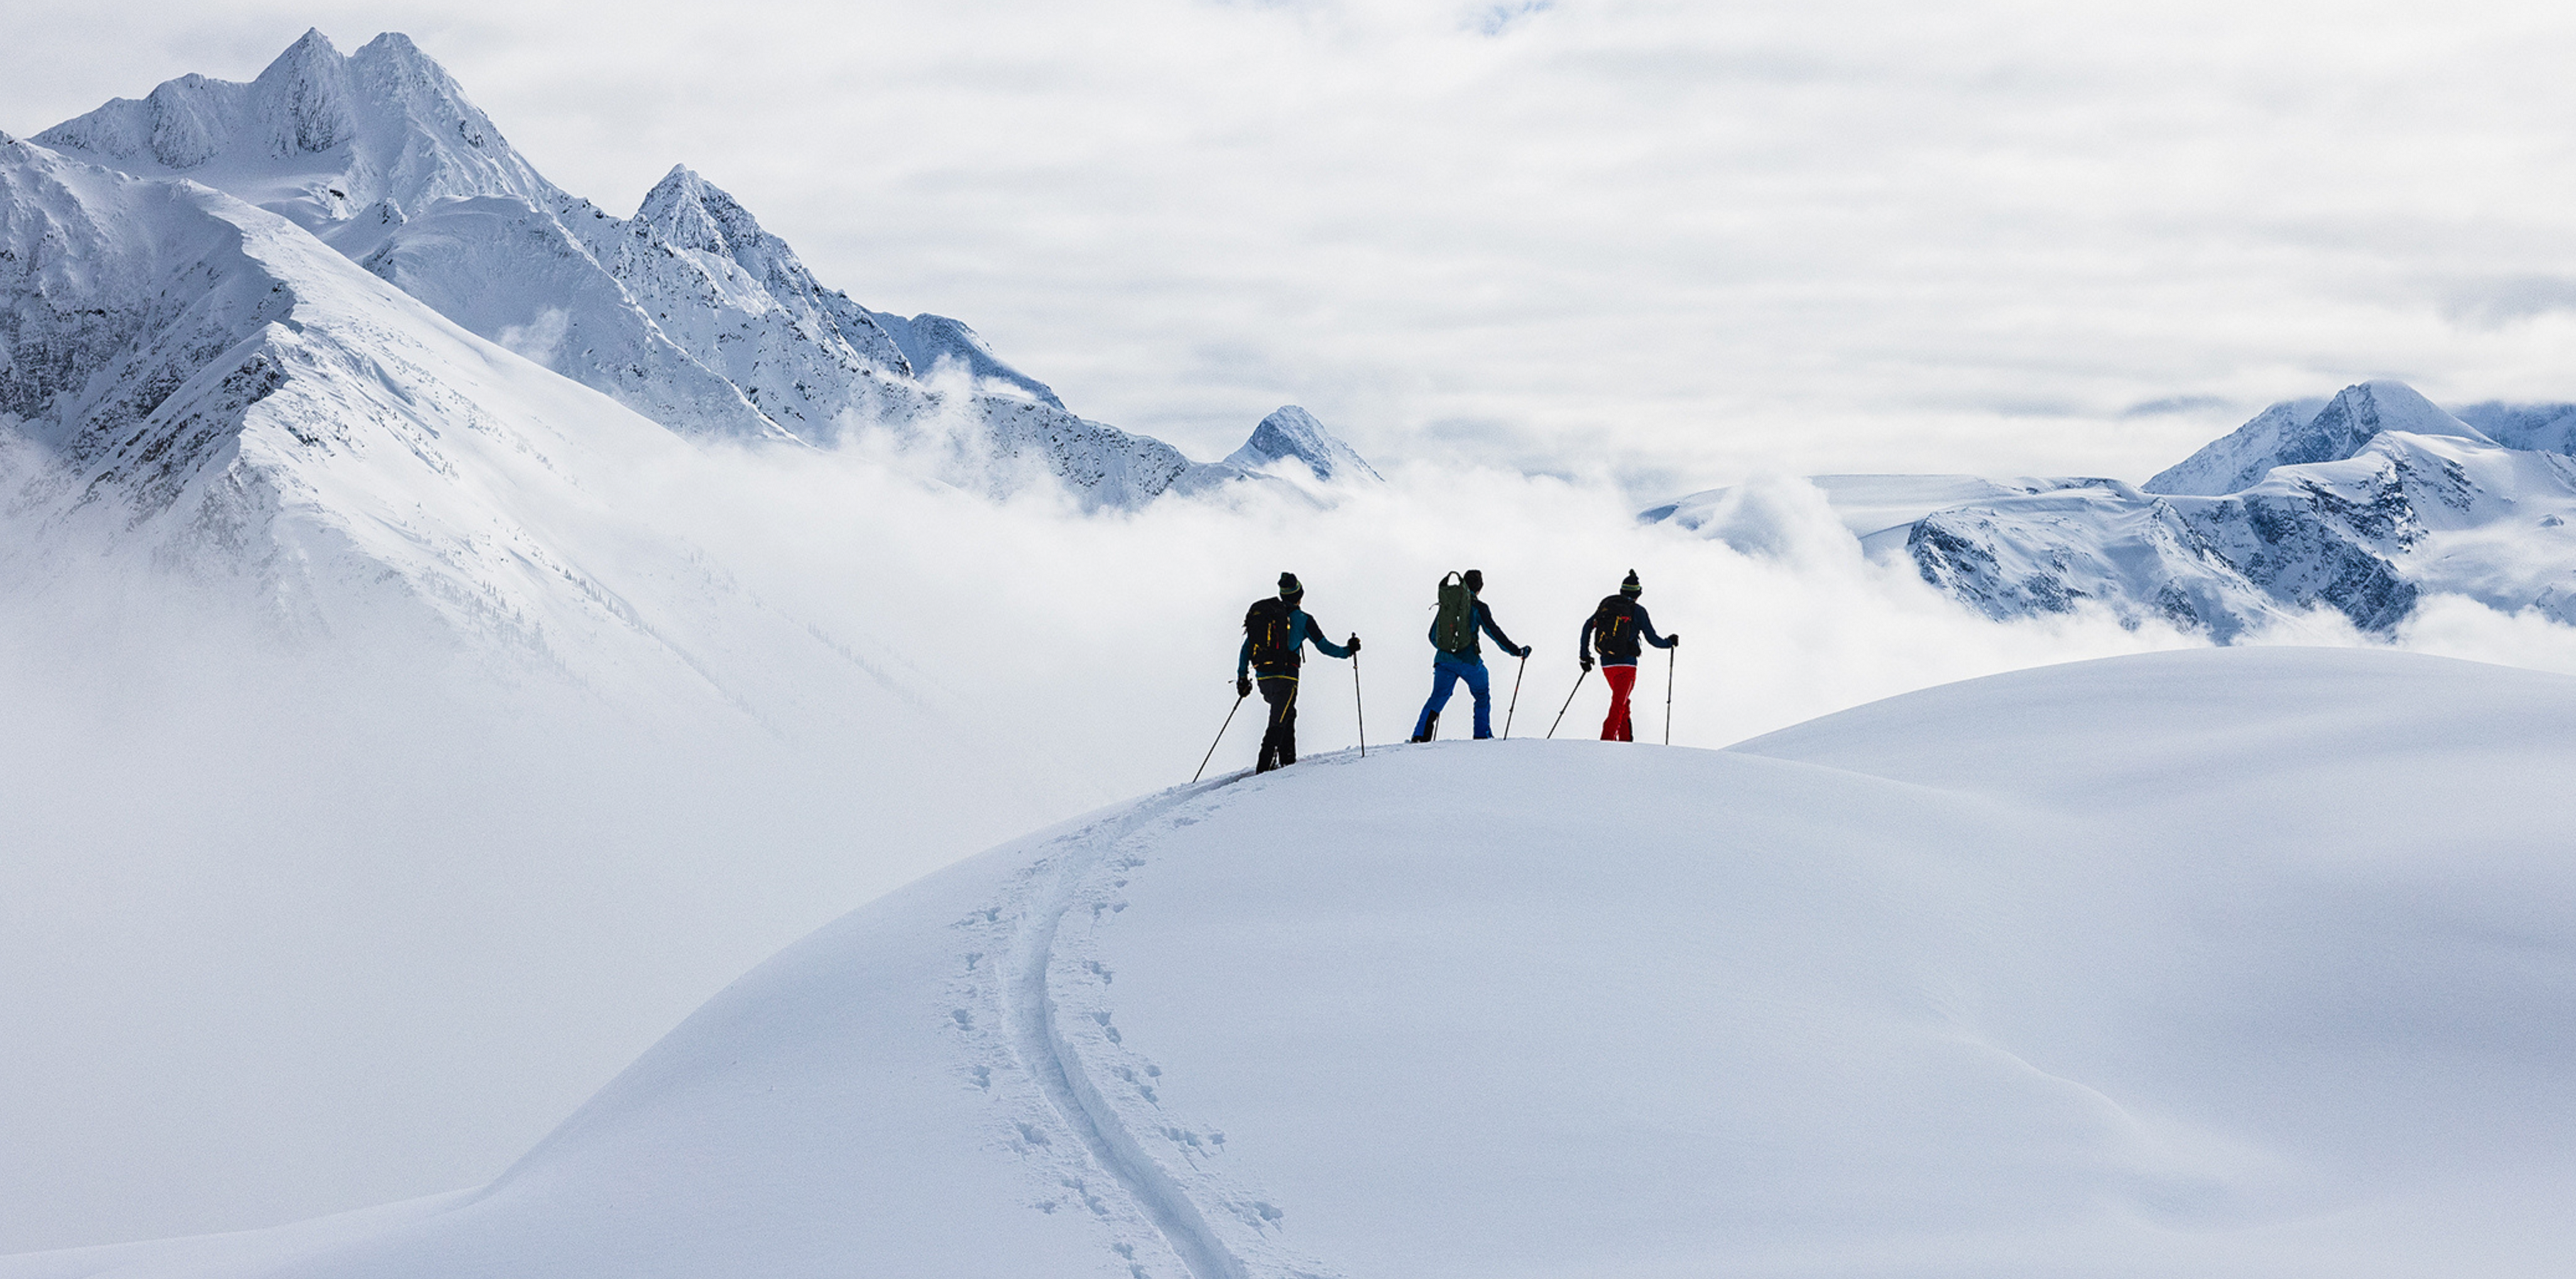 A beginners guide to Backcountry skiing and snowboarding